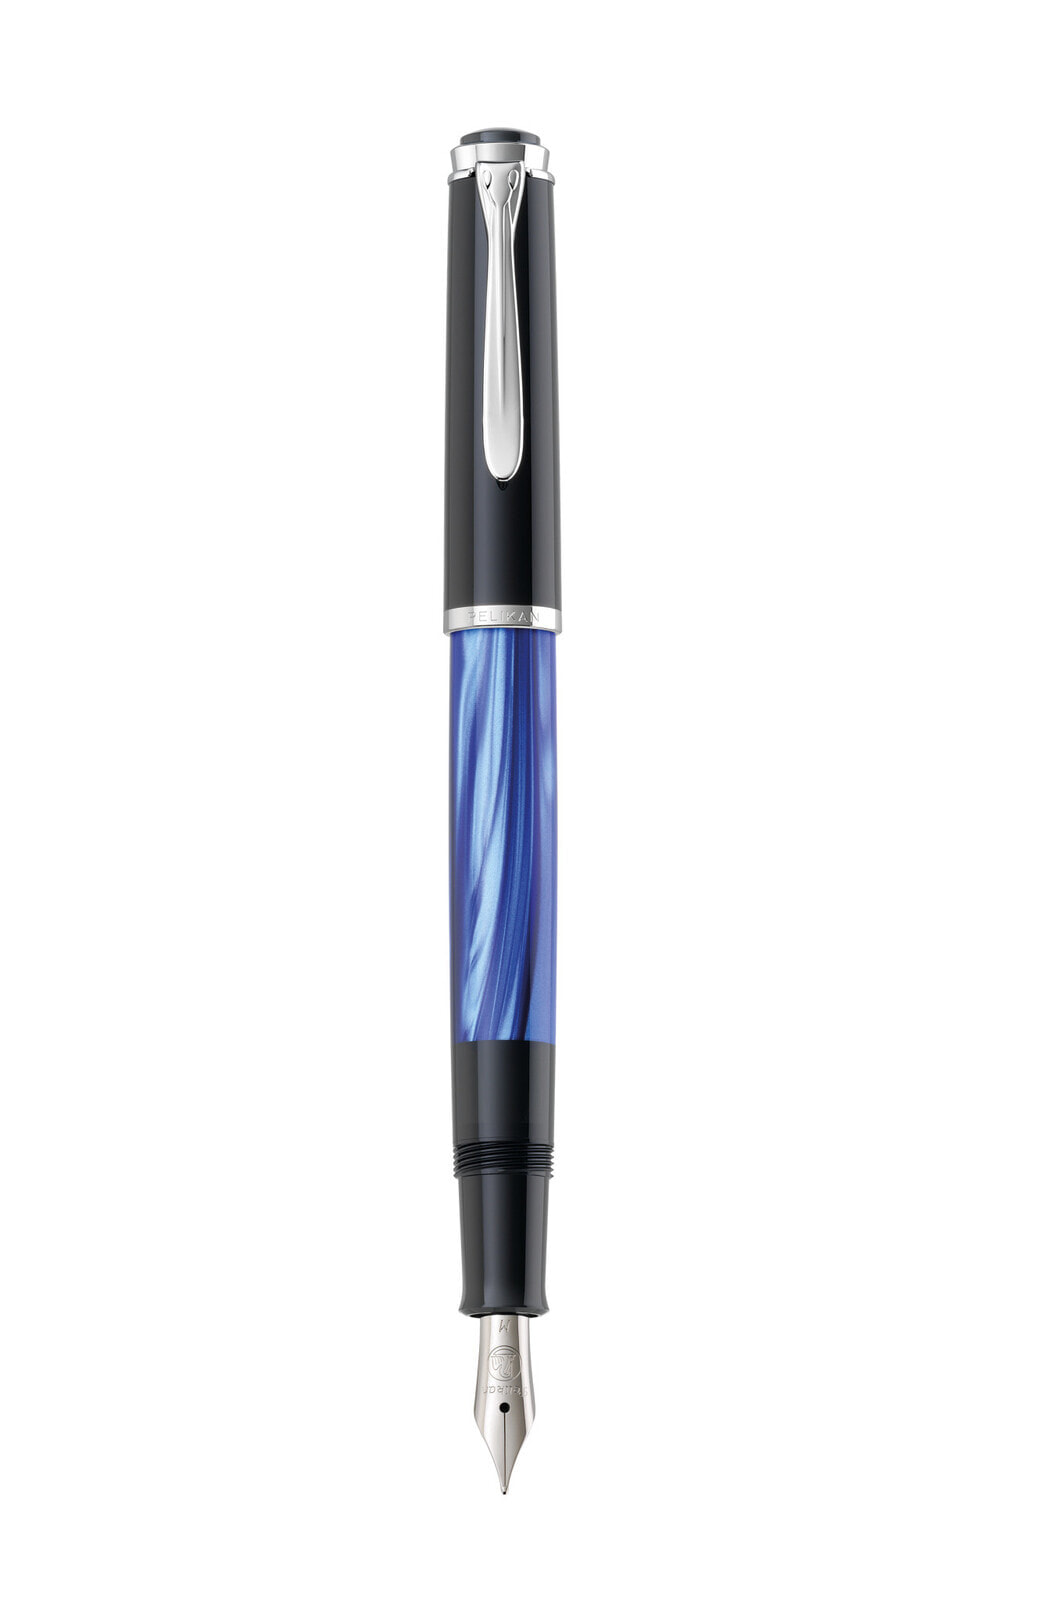 M205 - Black - Blue - Marble colour - Silver - Built-in filling system - Resin - Italic nib - Stainless steel - Medium